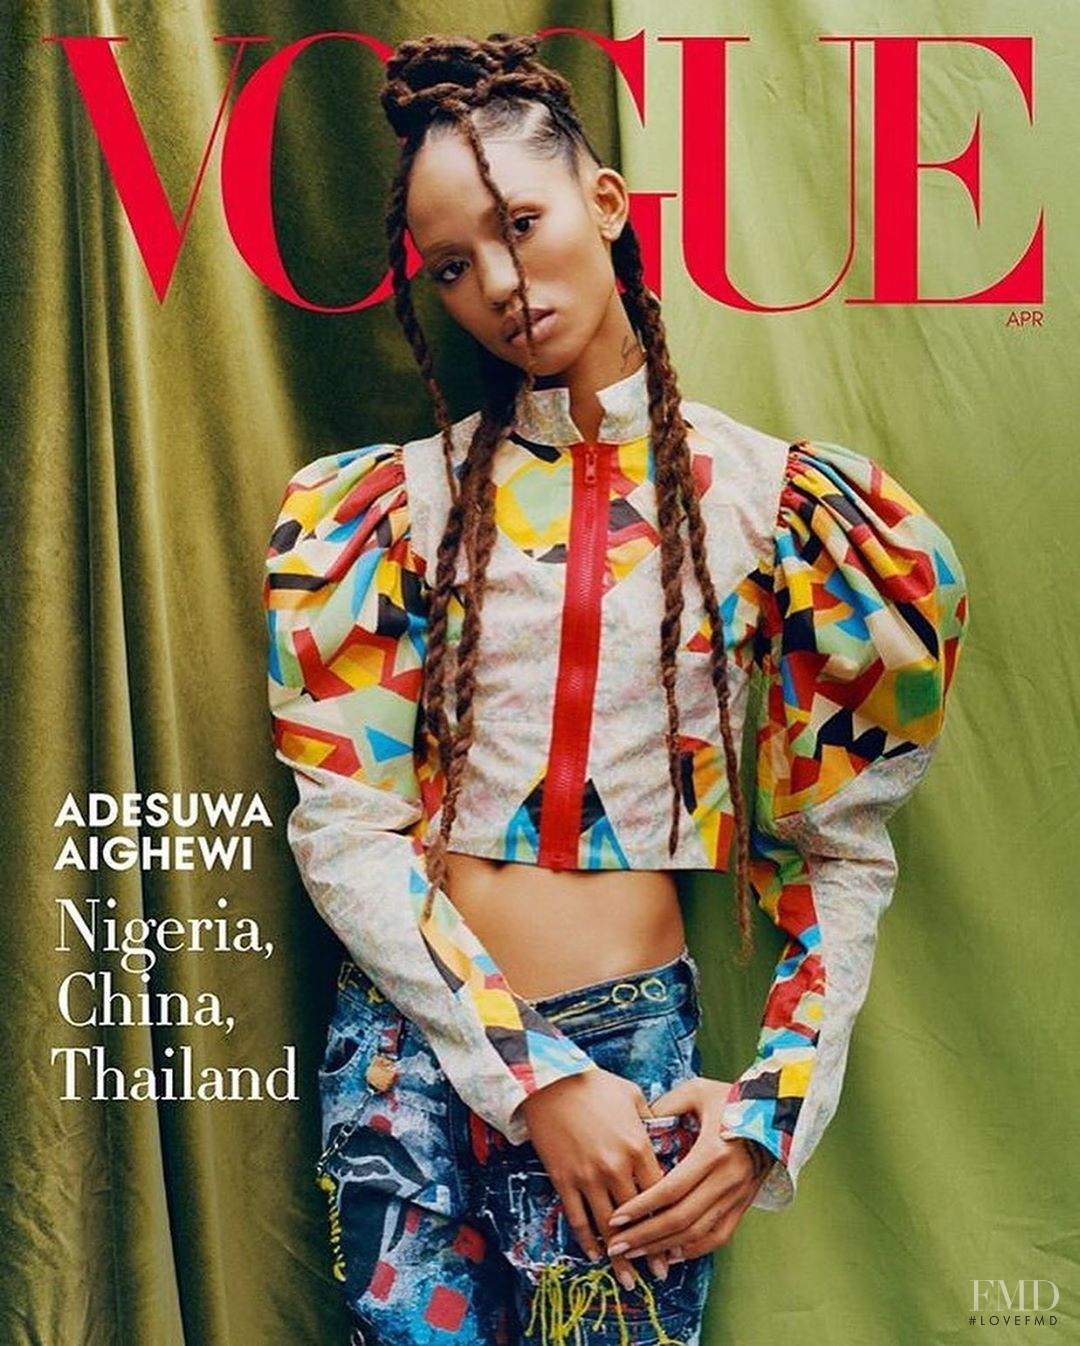 Cover of Vogue USA with Adesuwa Aighewi, April 2020 (ID:55045 ...